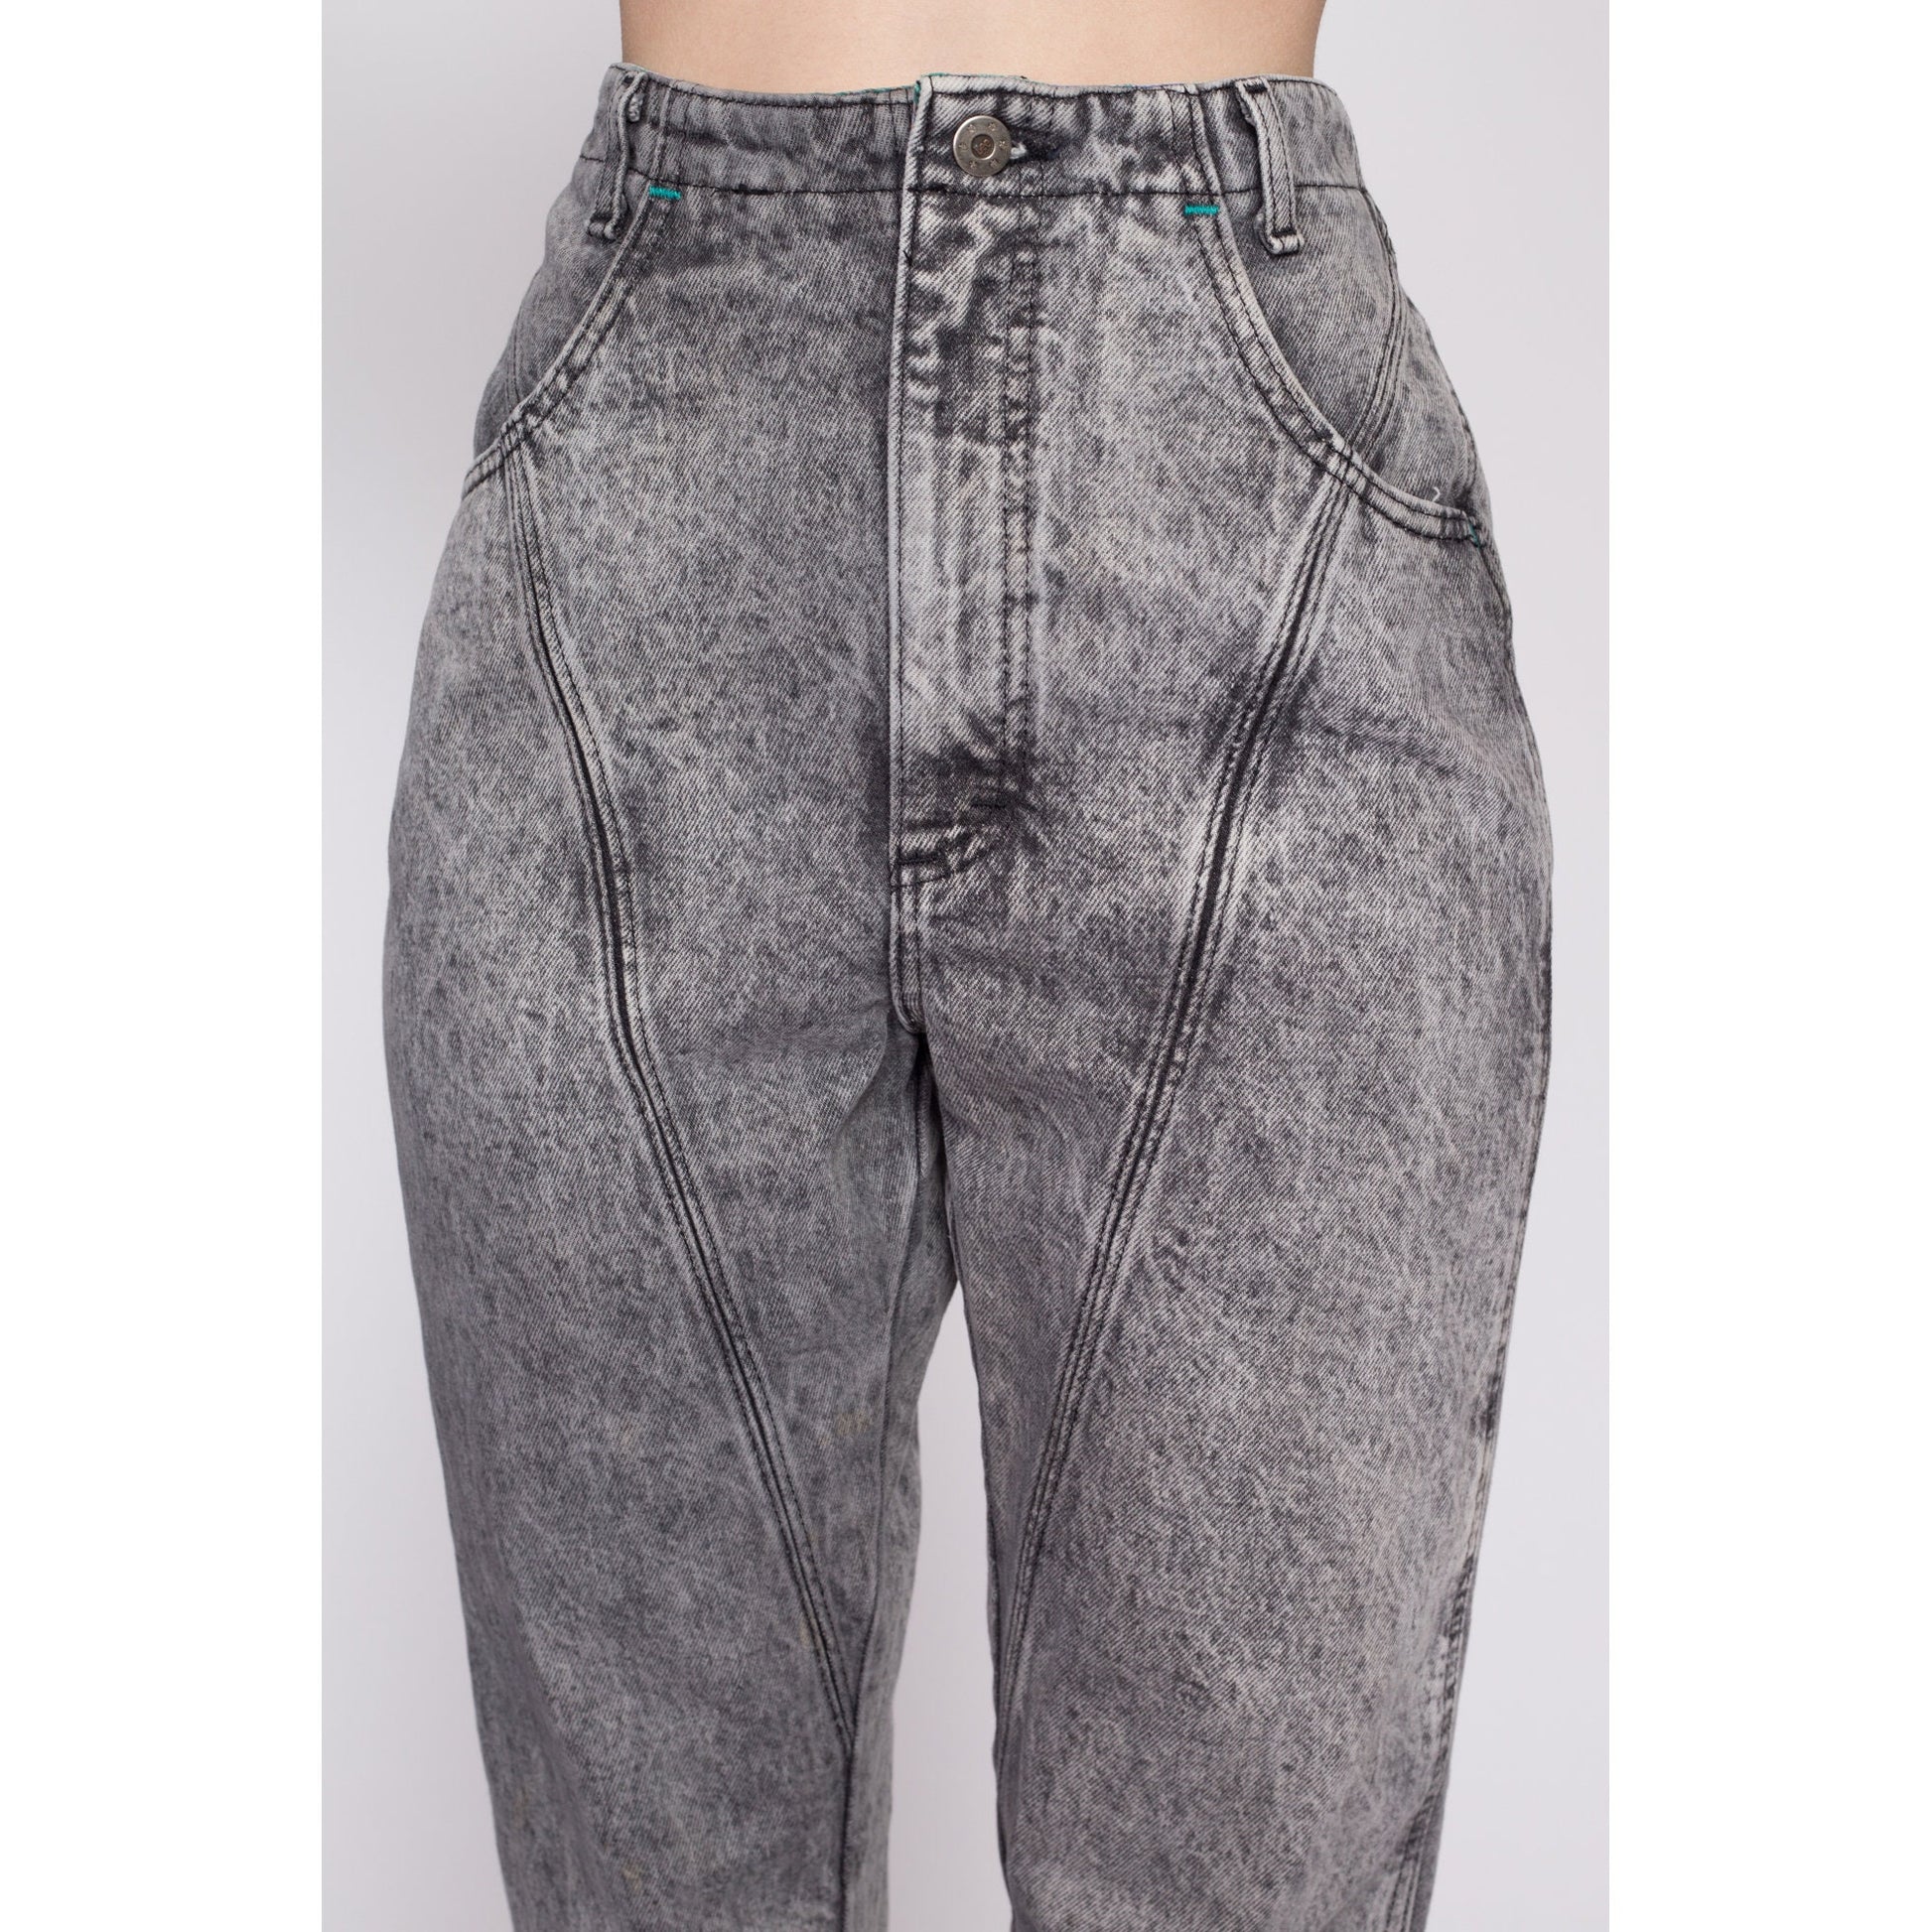 80s Lee Acid Wash High Waisted Curvy Fit Jeans - Extra Small | Vintage Faded Black Grey Denim Tapered Leg Mom Jeans